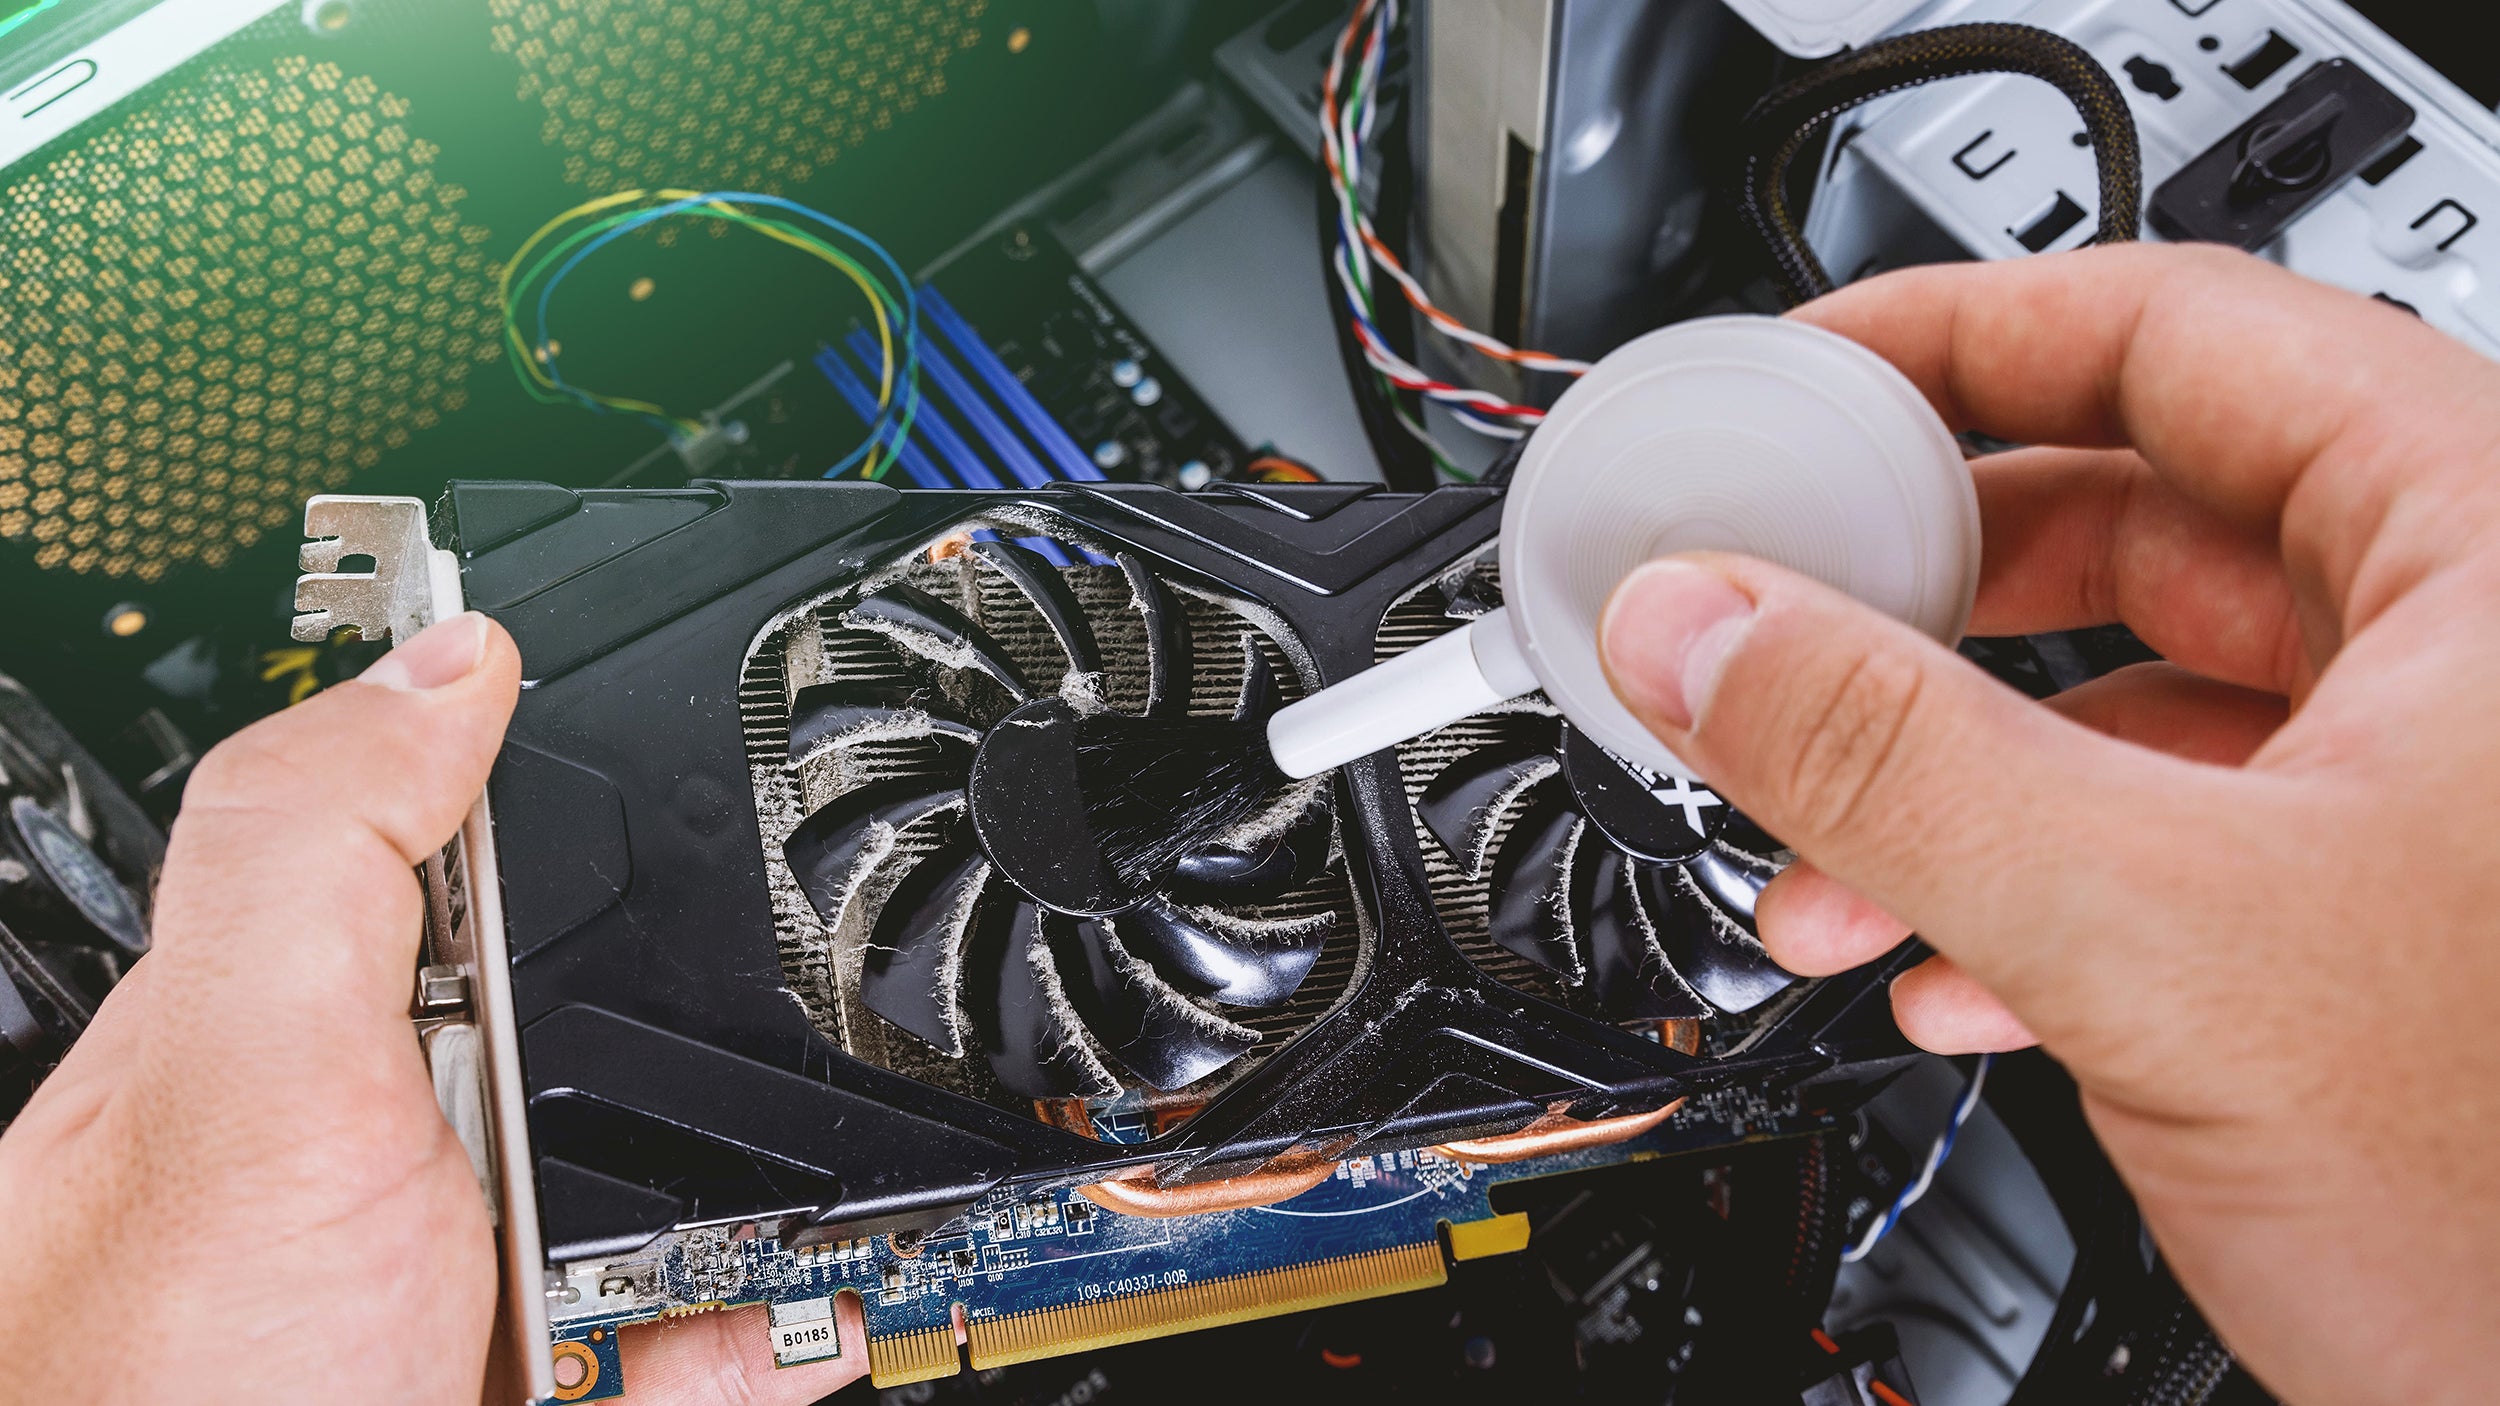 Open the computer case and clean any dust or debris from the fans and heat sinks.
Verify that all fans are functioning correctly.